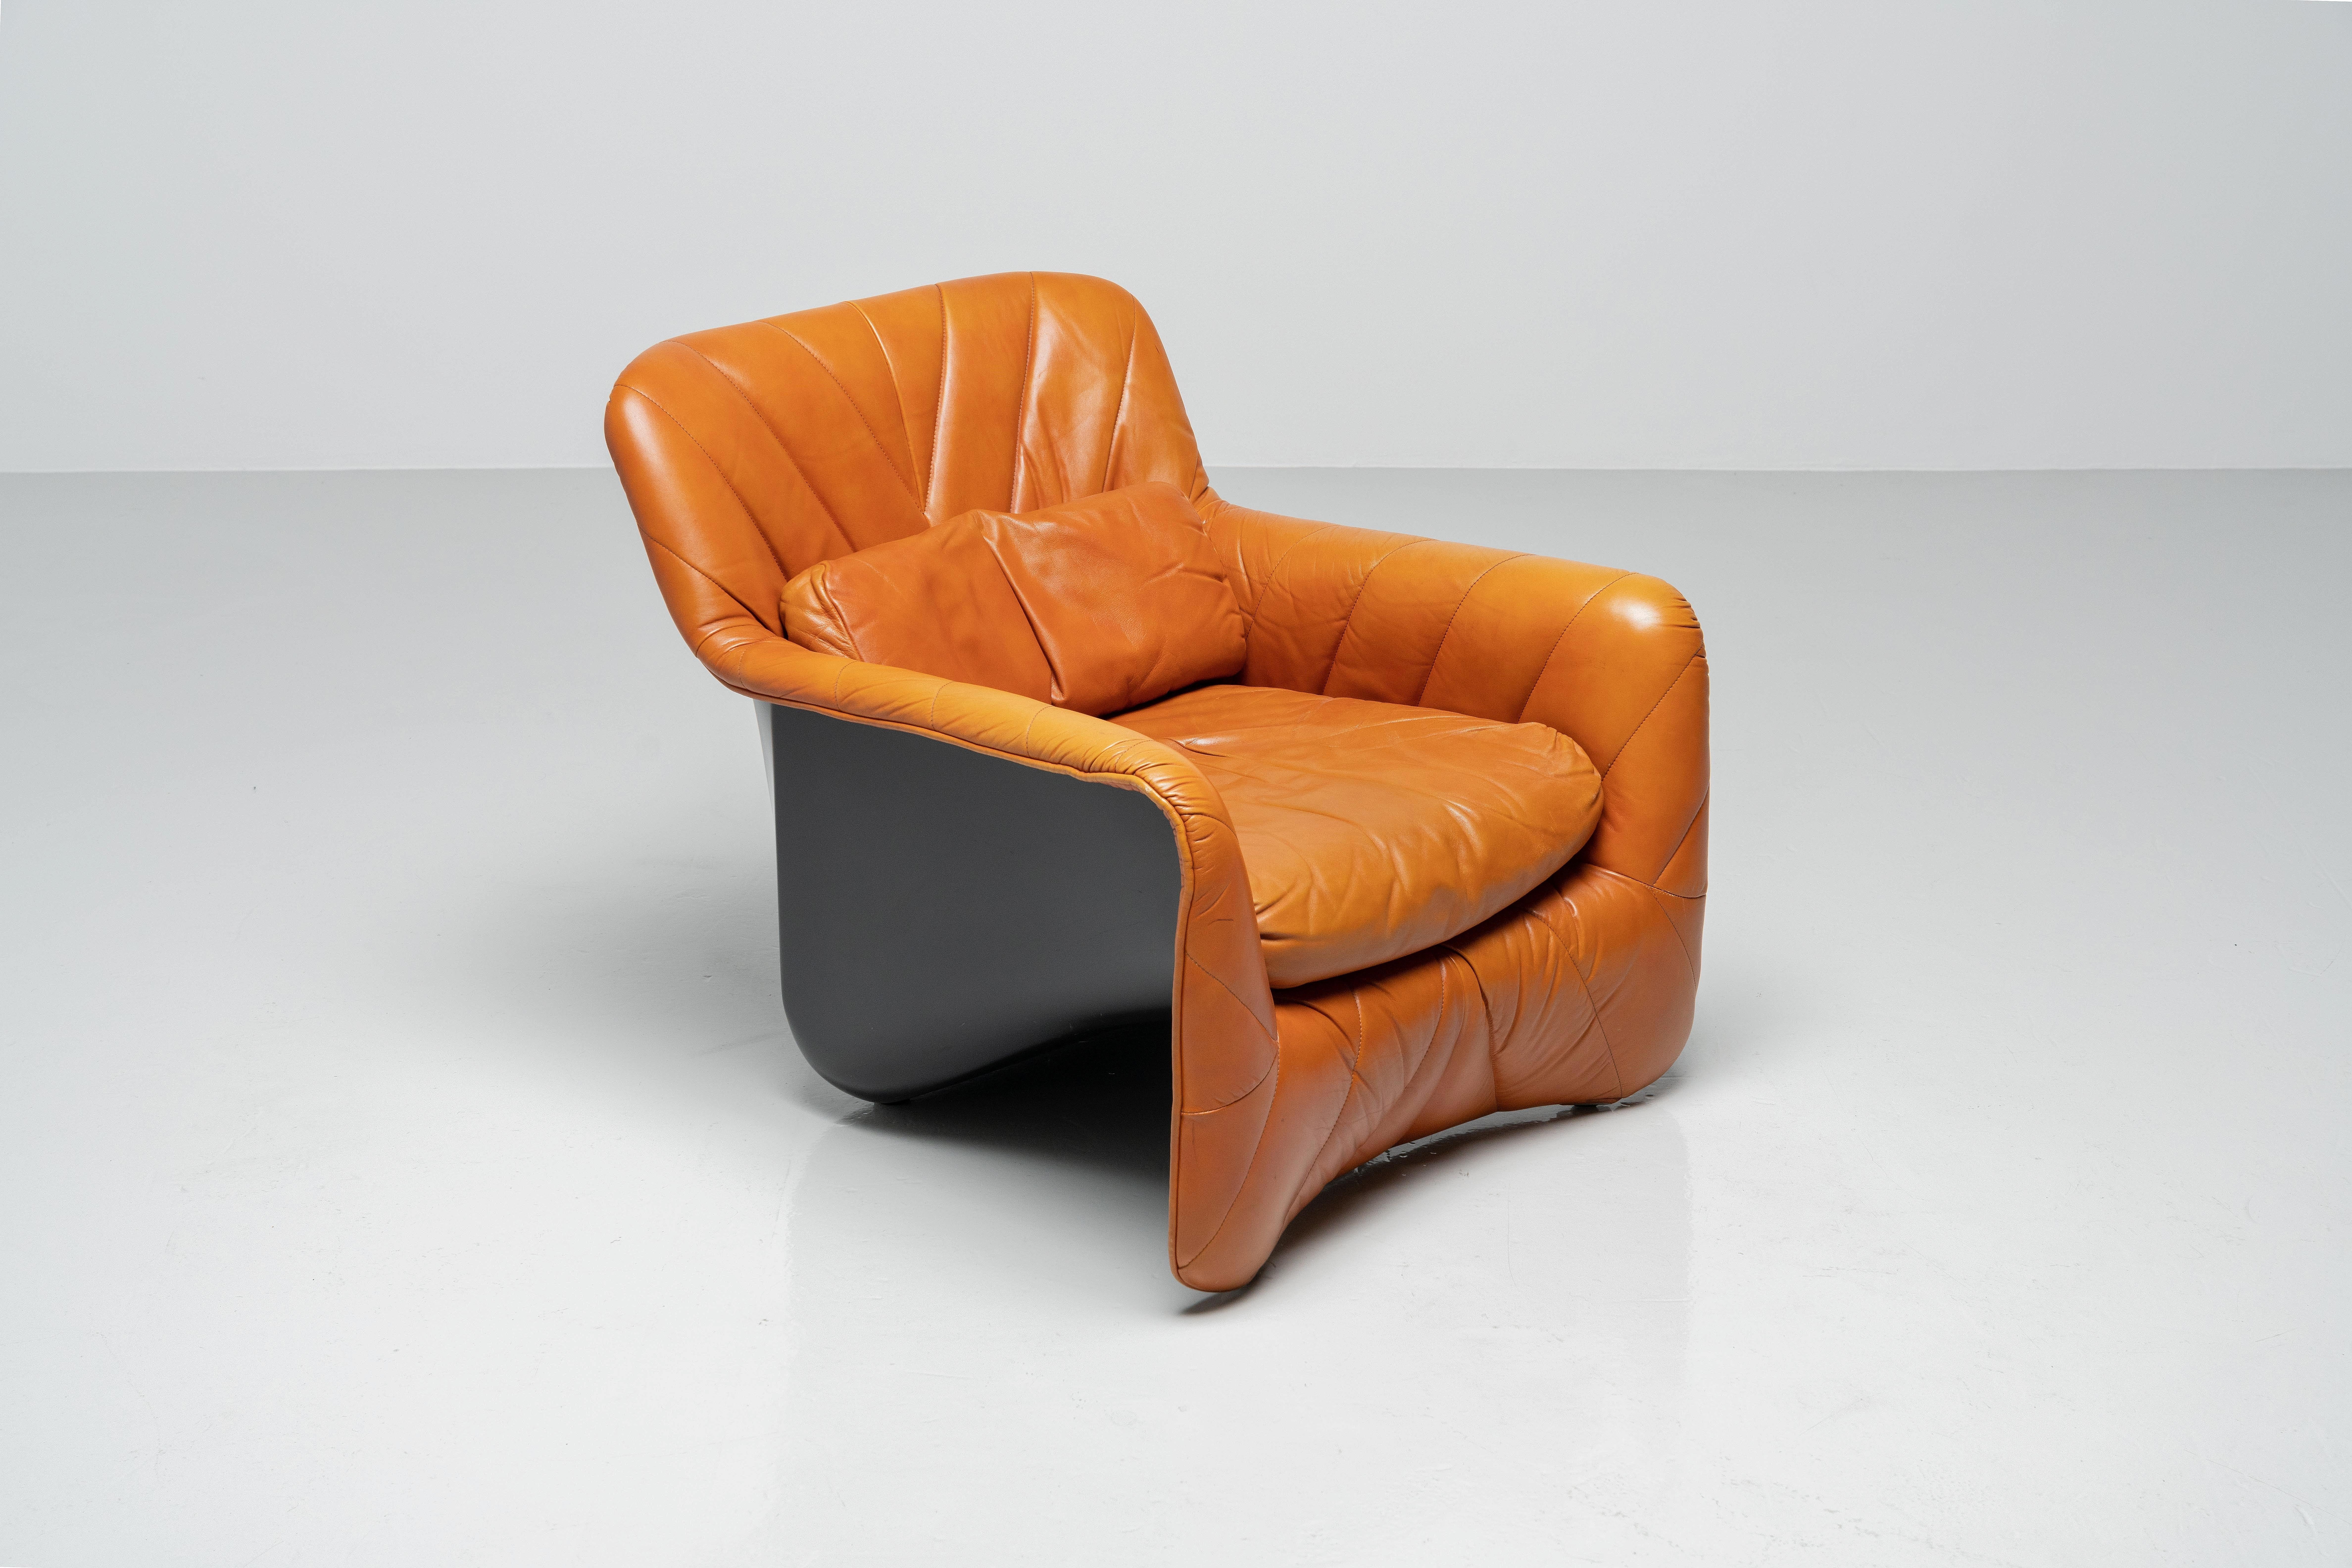 Very nice Bicia lounge chair by Designer Carlo Bartoli for Arflex, Italy 1969. The chair itself is in very good and original condition, and a nice example of Italian design from the 60's and 70's, where Carlo Bartoli created some iconic furniture